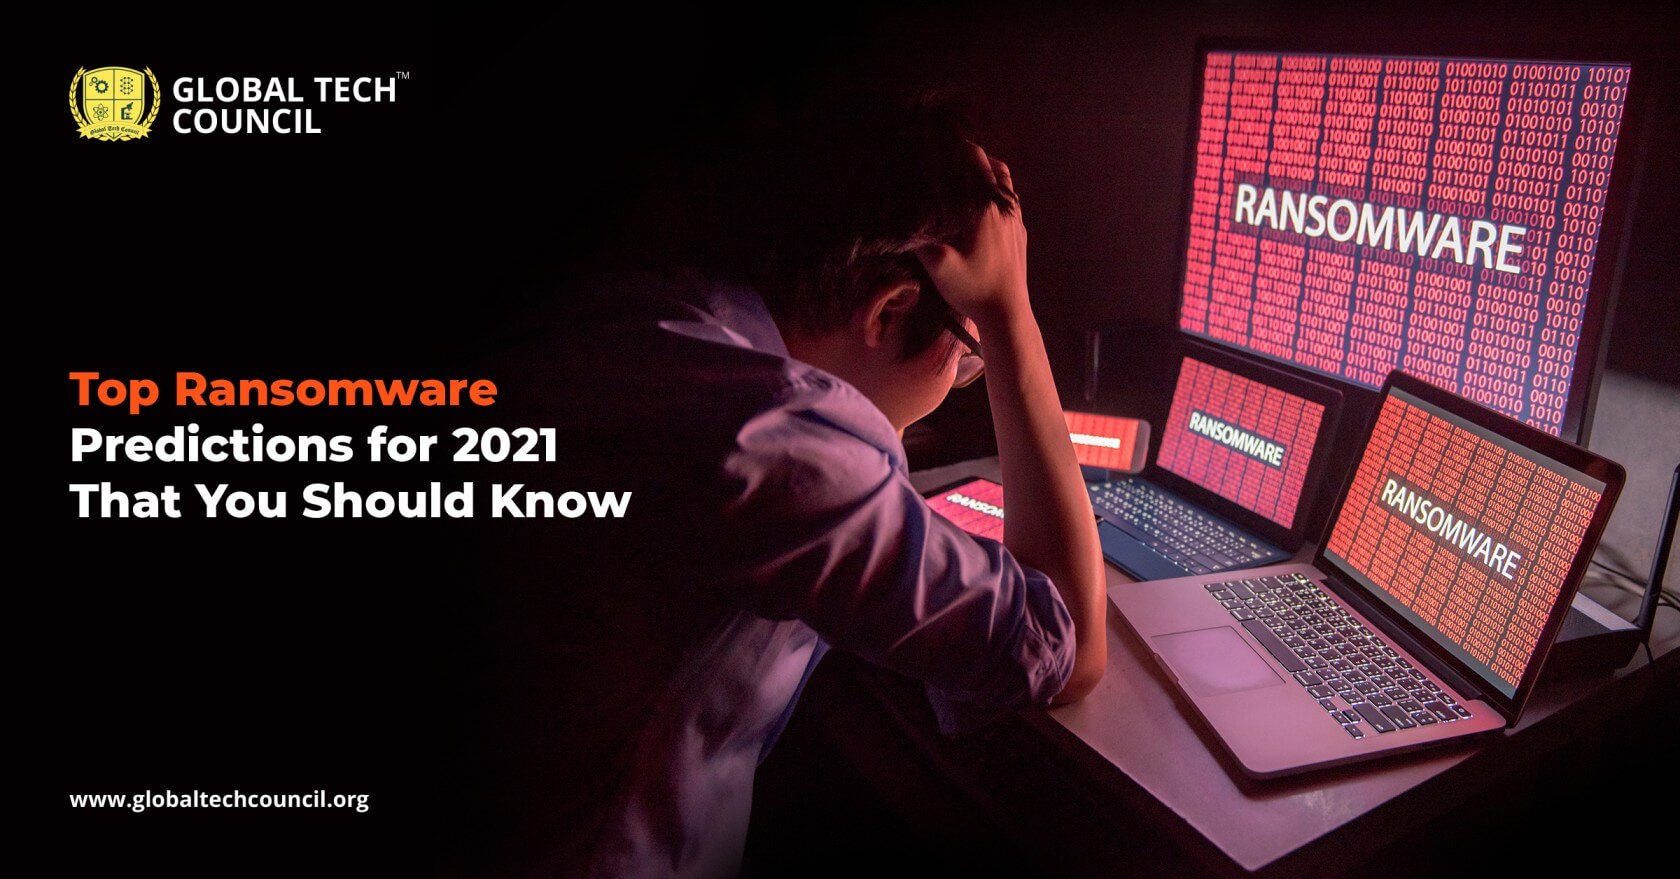 Top Ransomware Predictions for 2021 That You Should Know